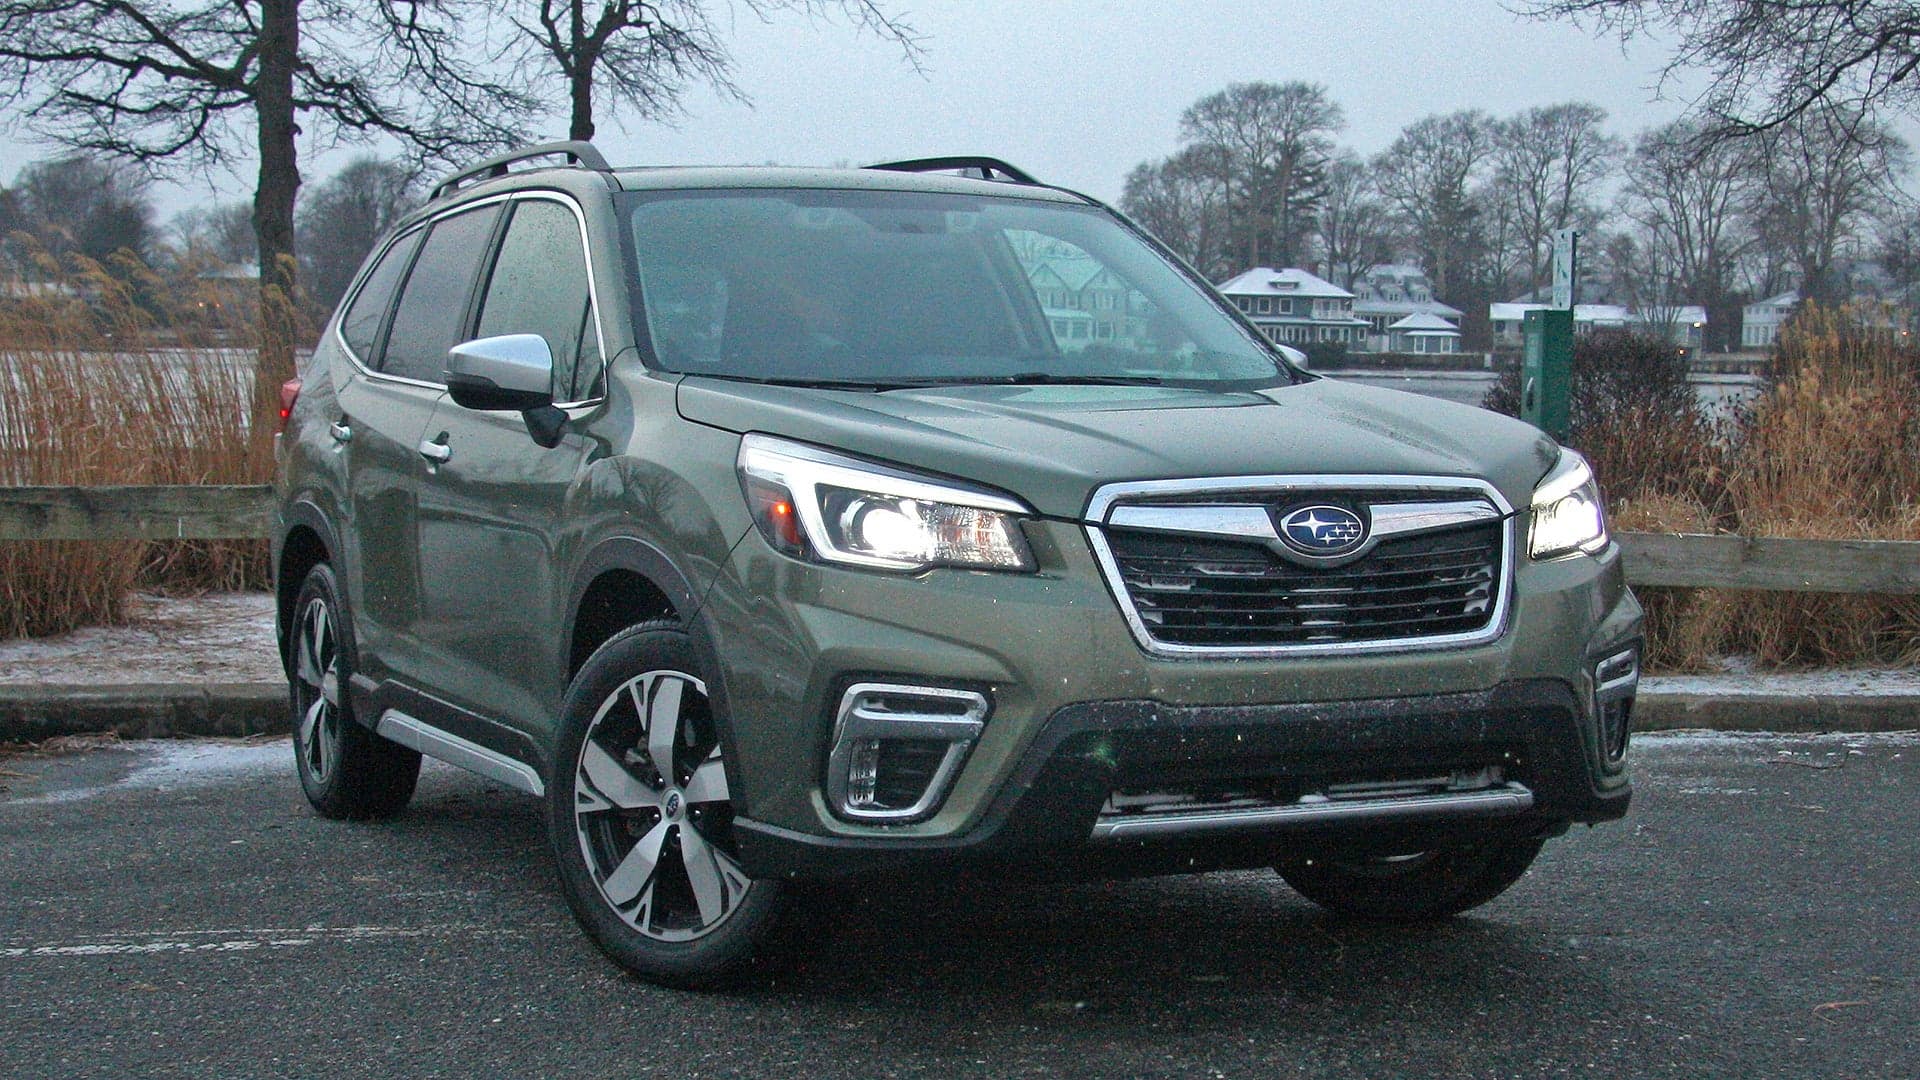 2019 Subaru Forester New Dad Review: The Swiss Army Knife of Family-Friendly Crossovers